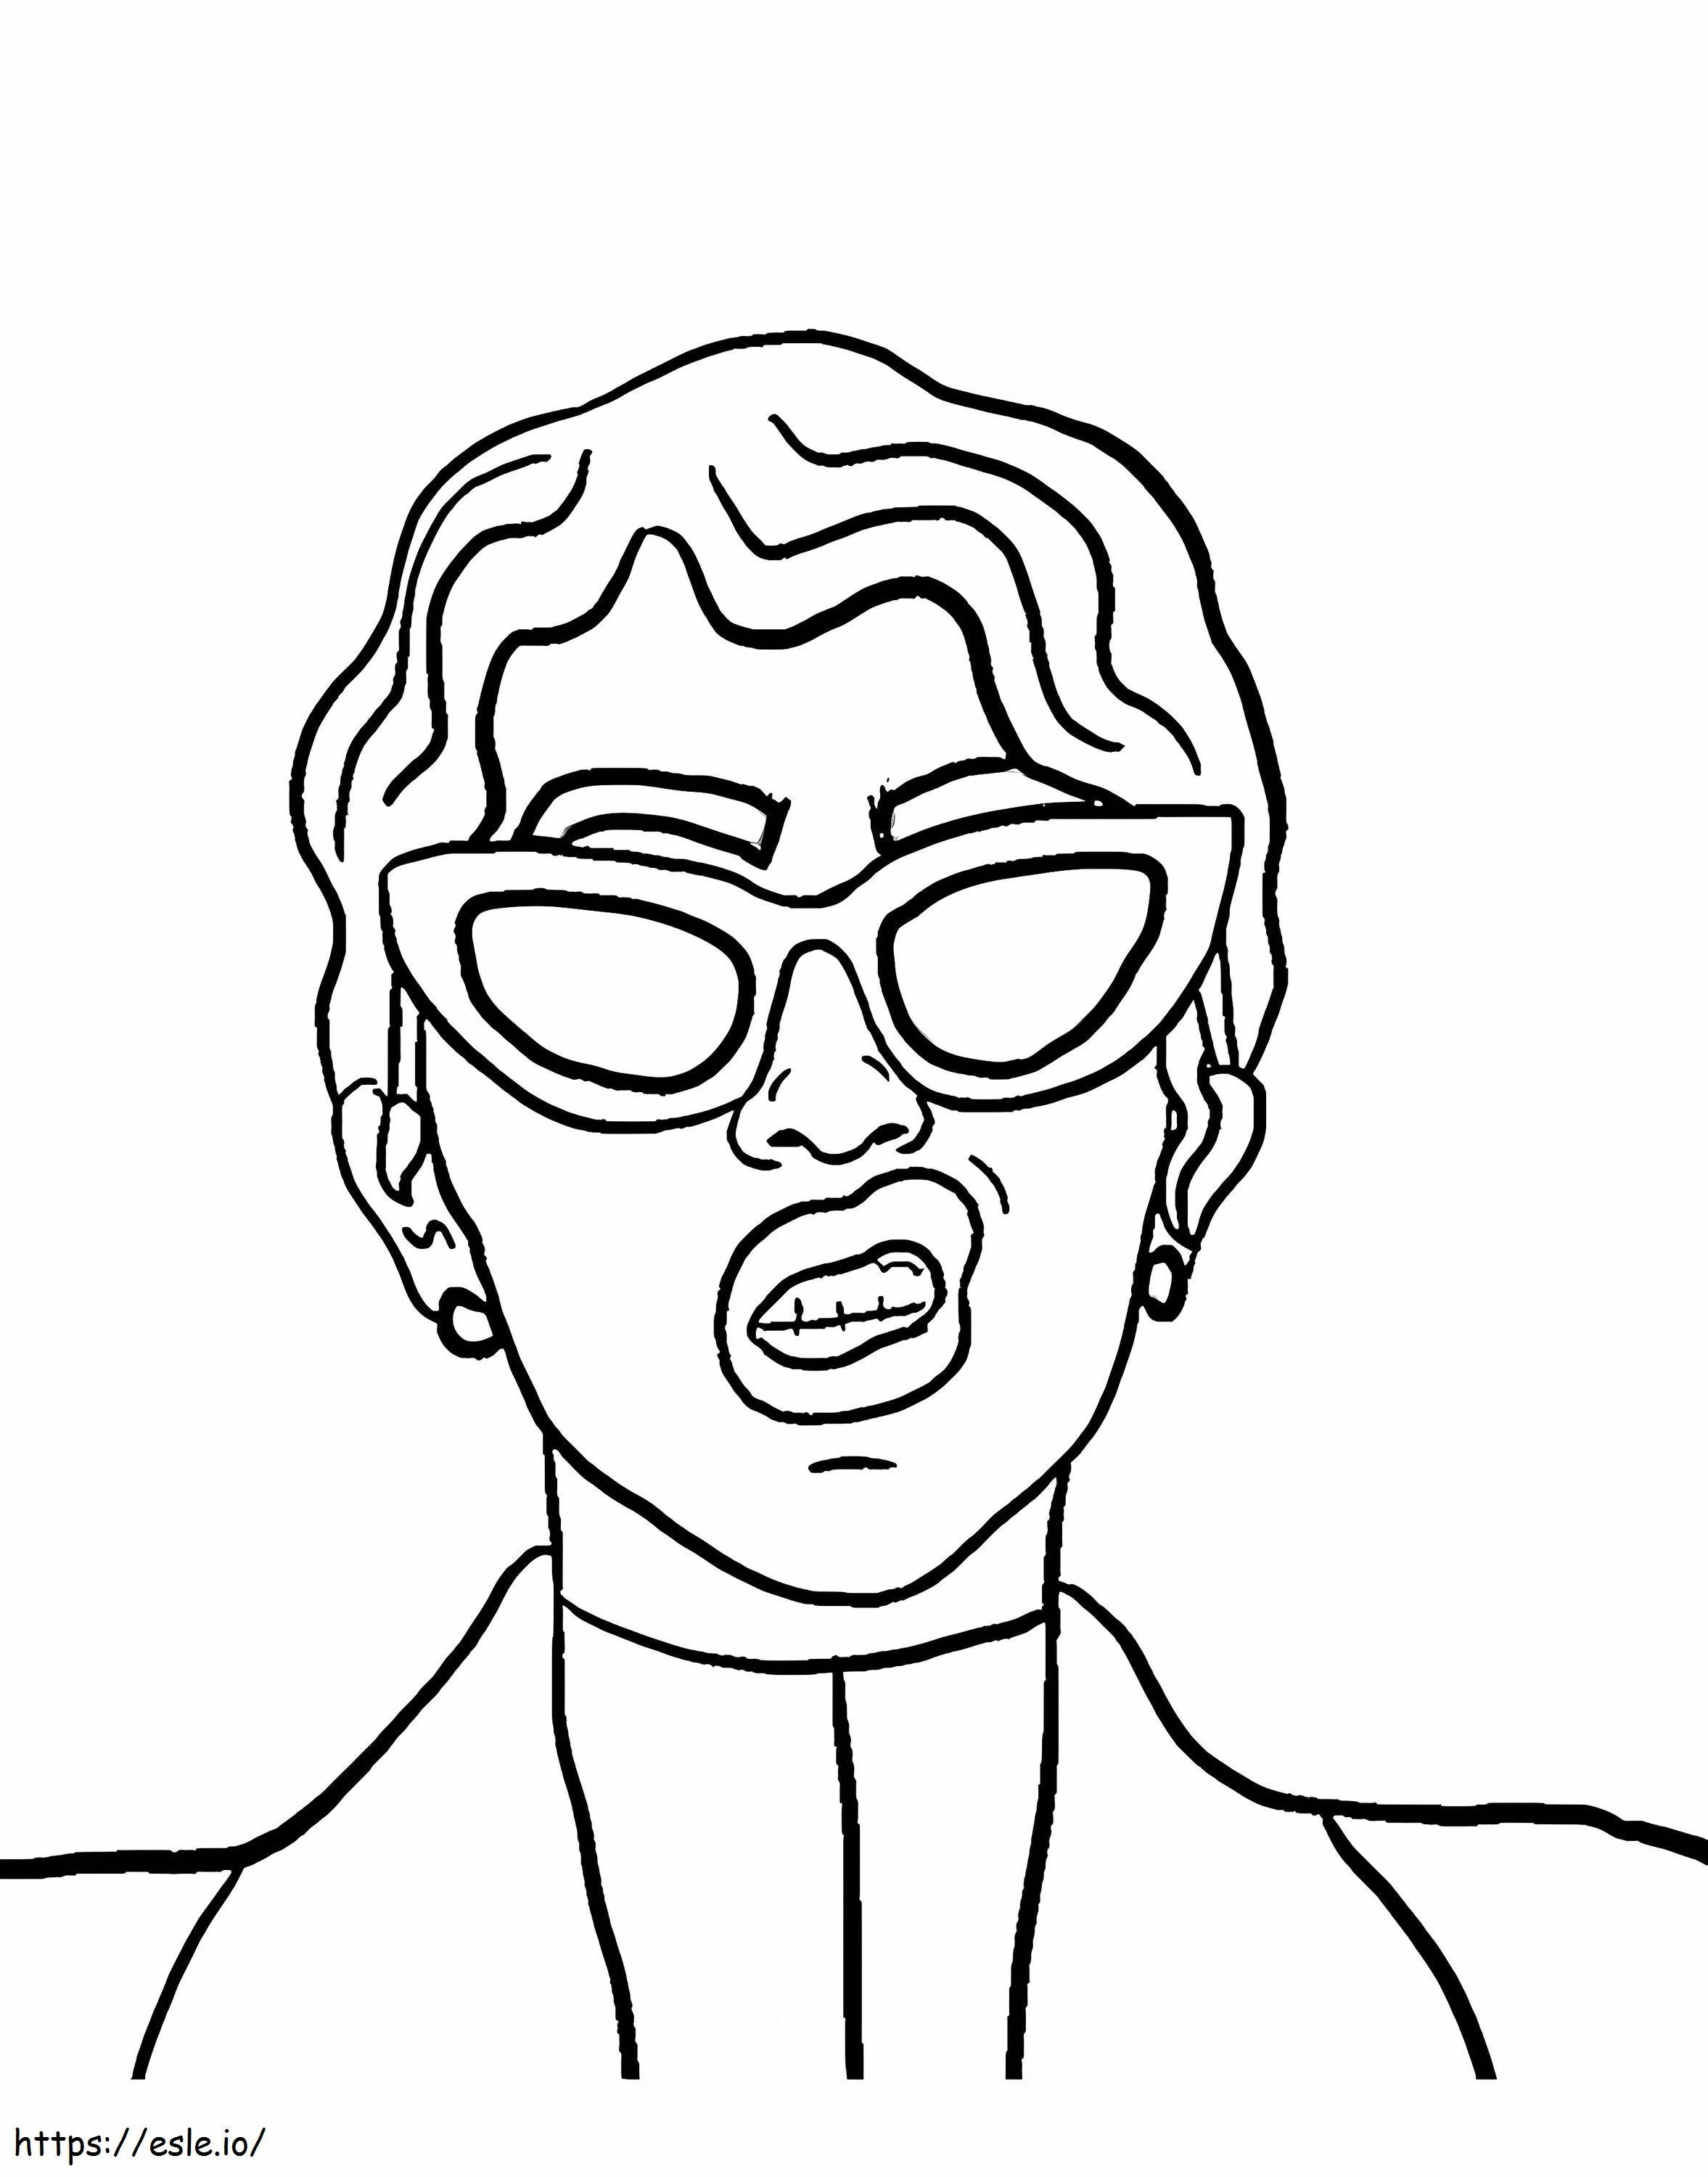 Cardi B With Glasses coloring page